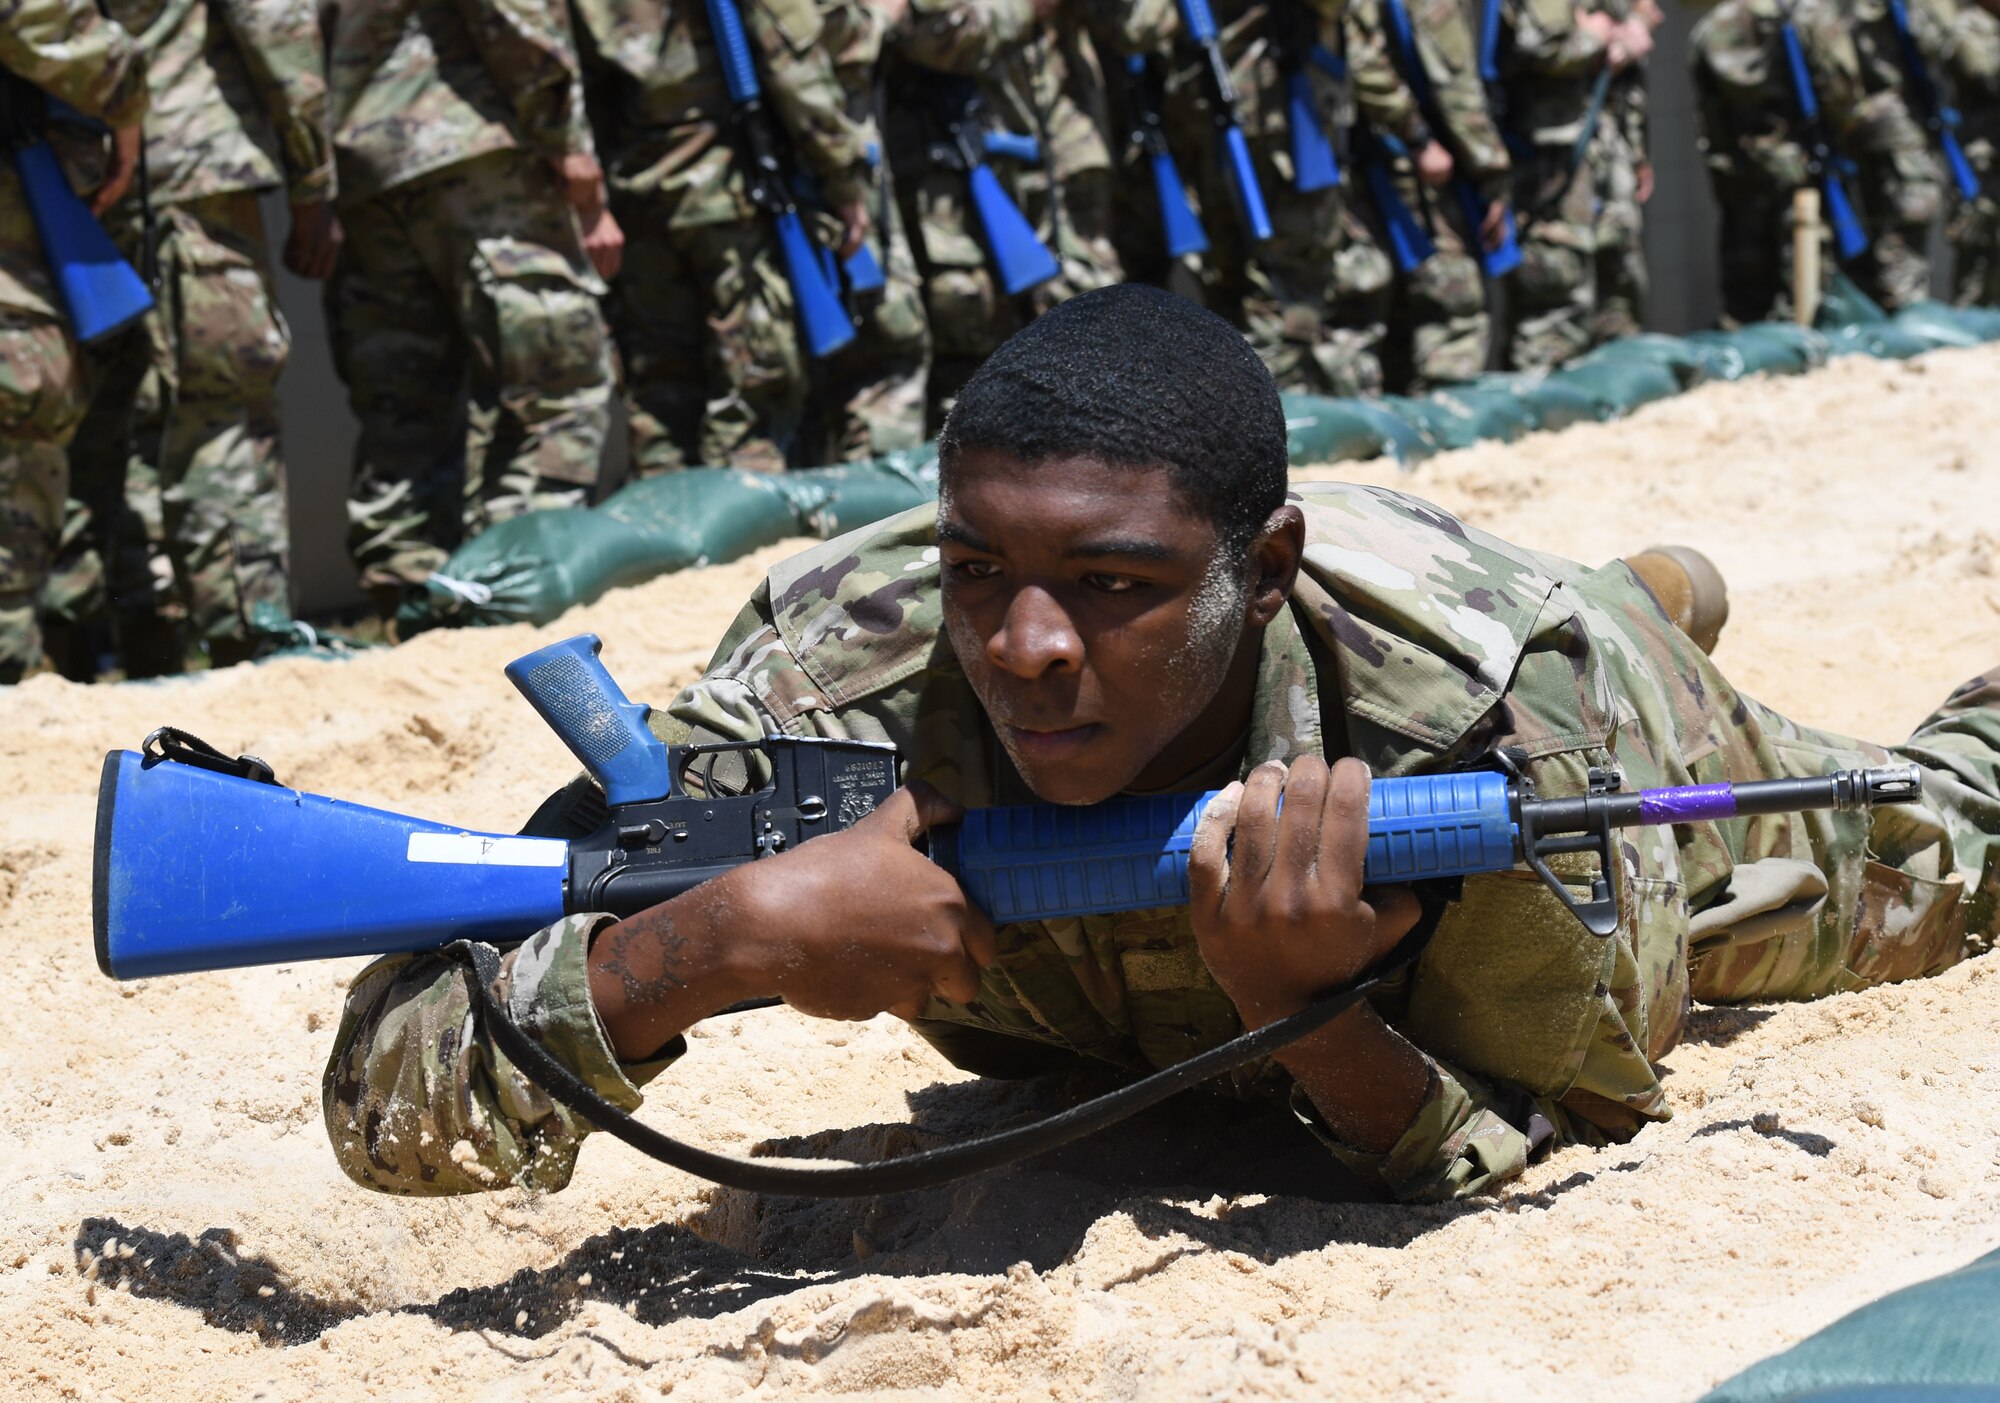 Airmen crawls in sand with rifle